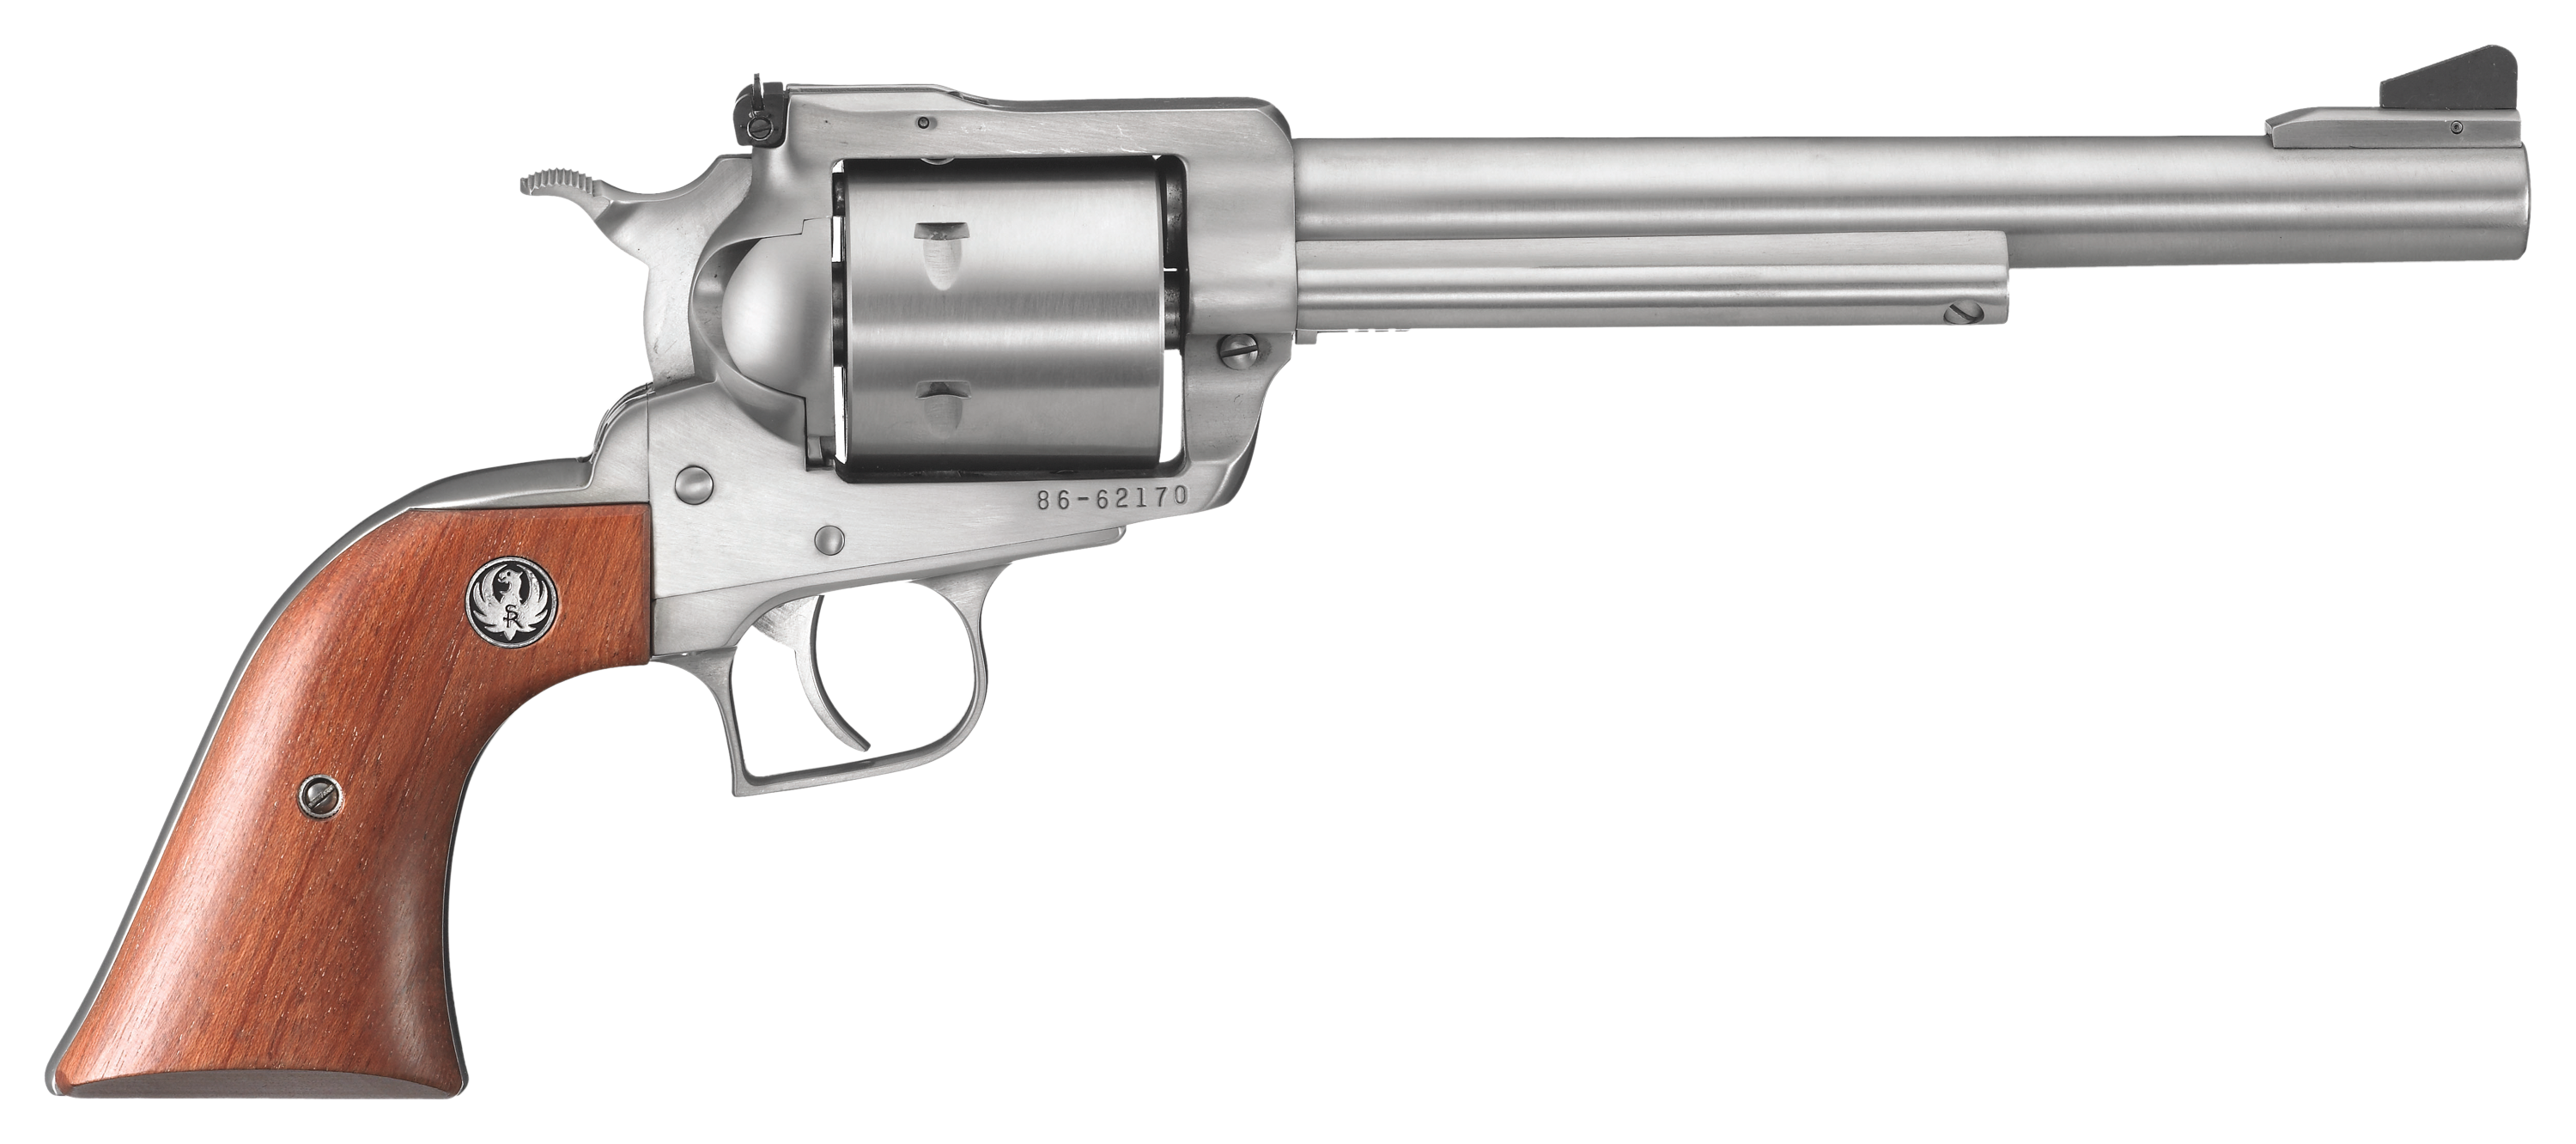 The History of the Ruger Blackhawk